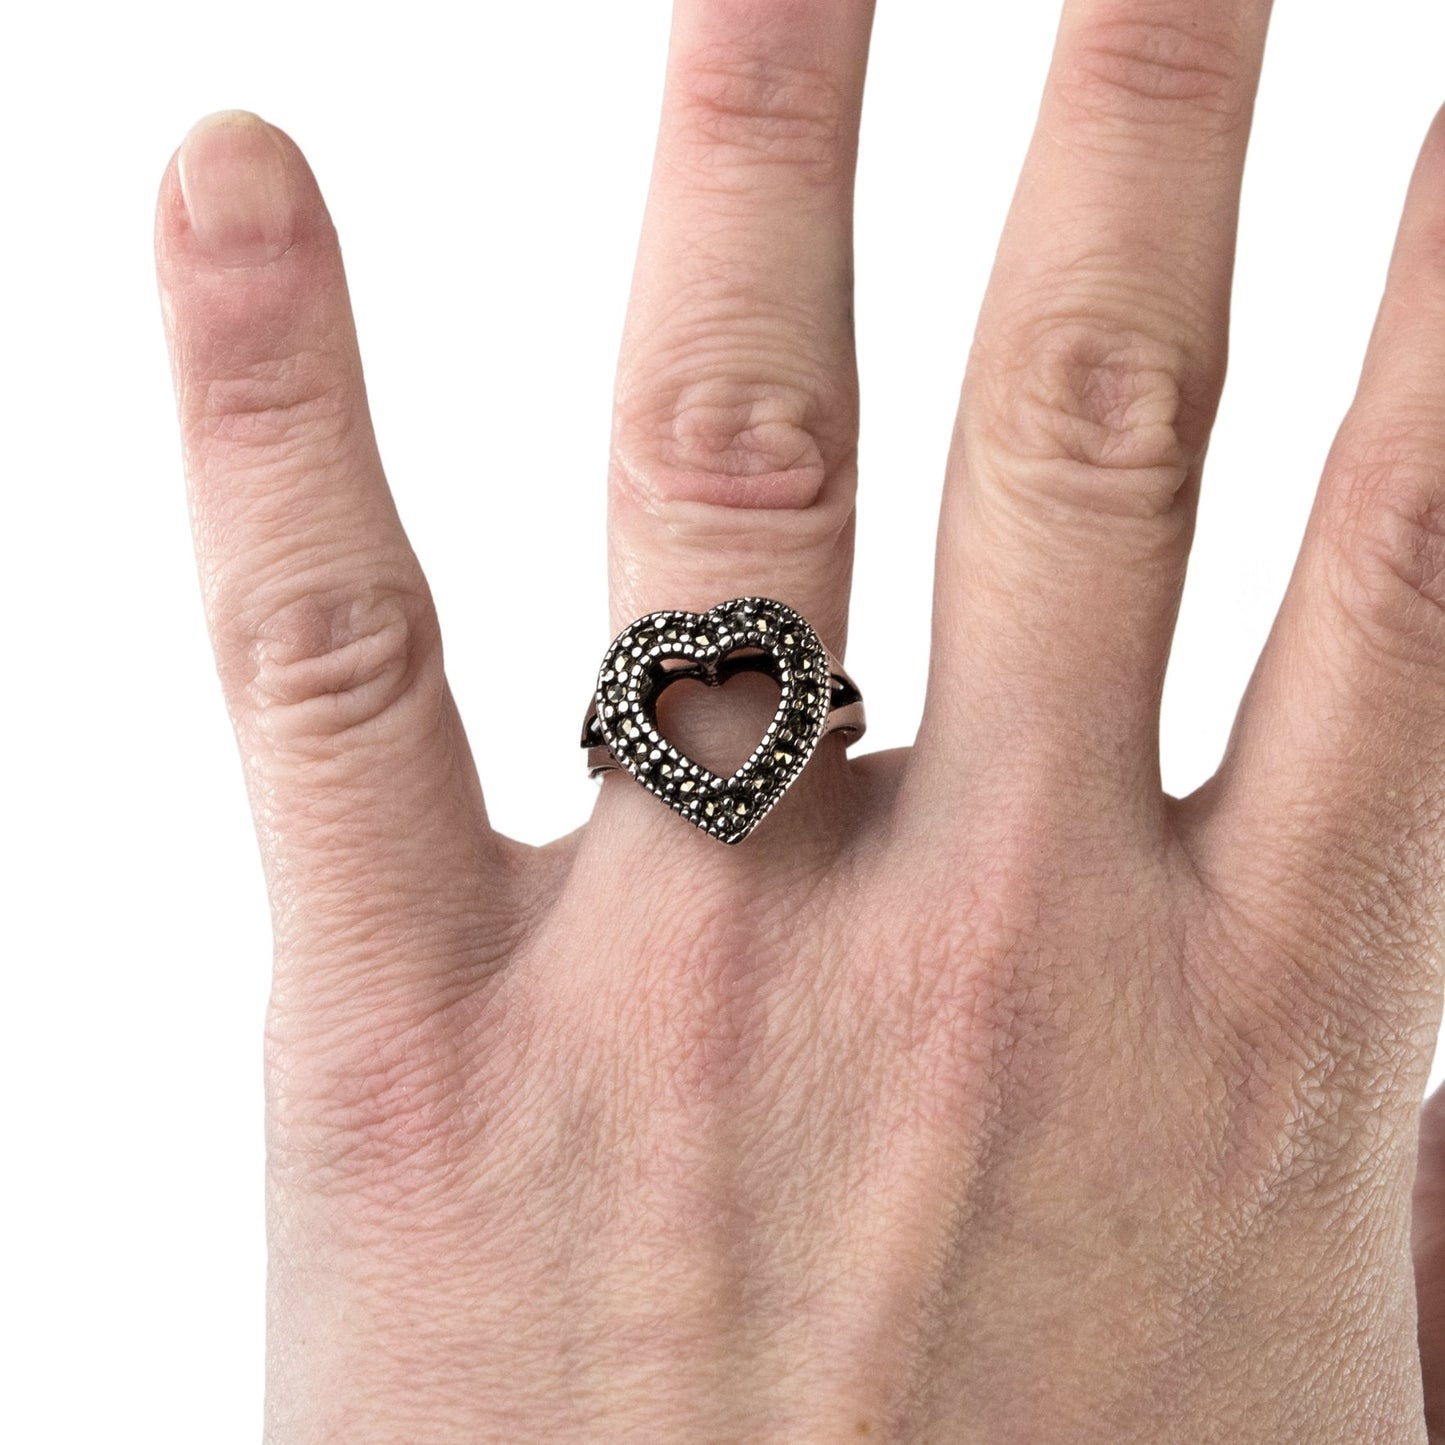 Vintage Ring Genuine Marcasite Heart Ring Antique 18k White Gold Silver  R1756 - Limited Stock - Never Worn